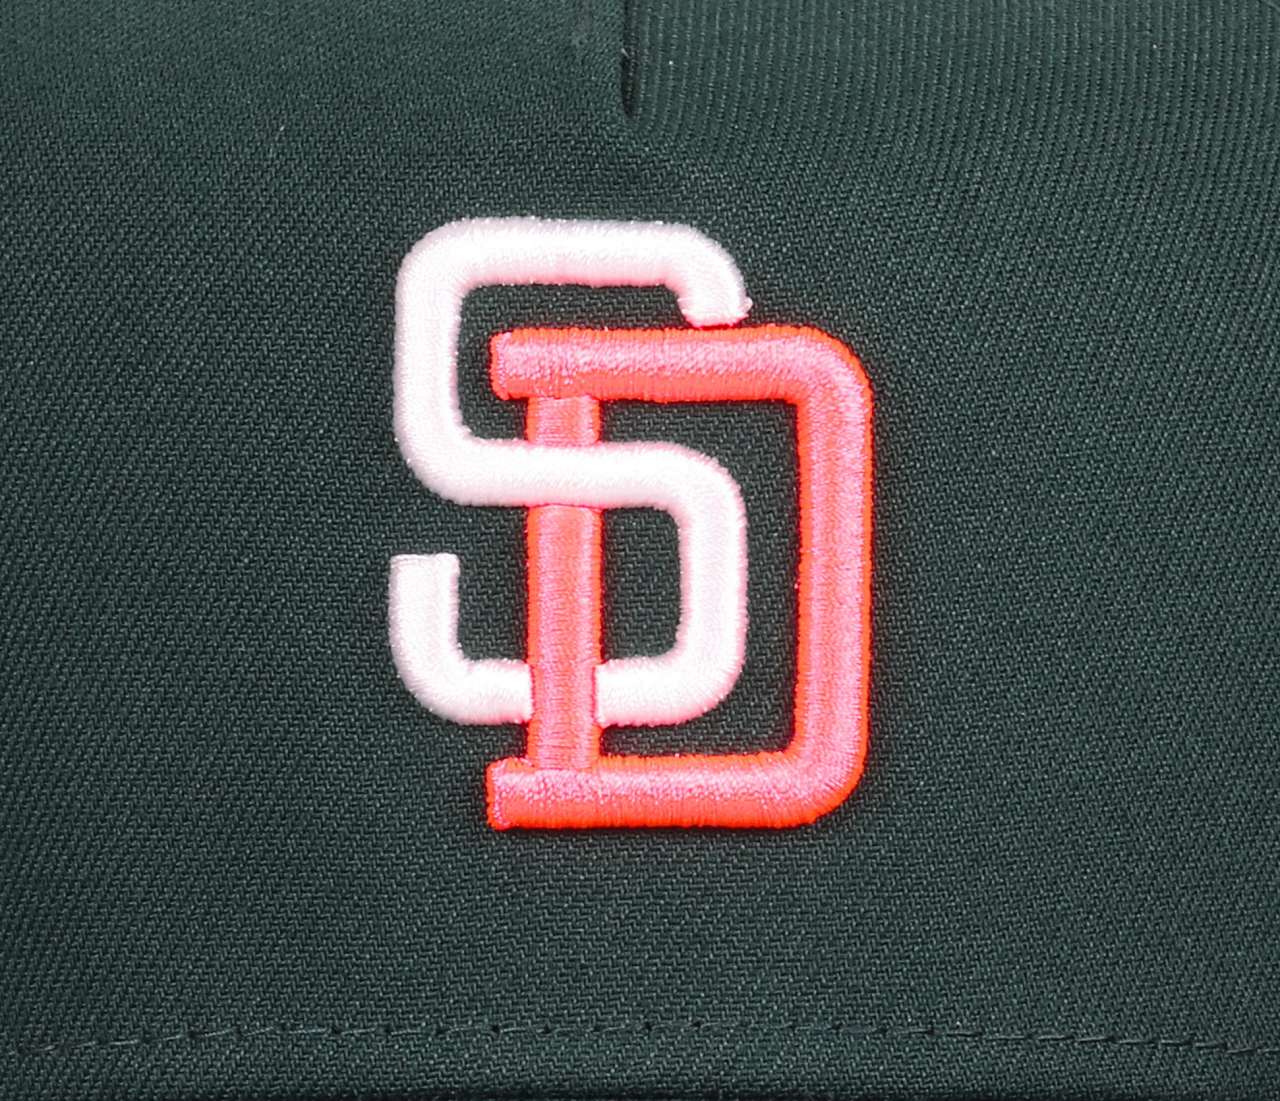 San Diego Padres MLB World Series 1998 Sidepatch Dark Green 9Forty A-Frame Adjustable Cap New Era